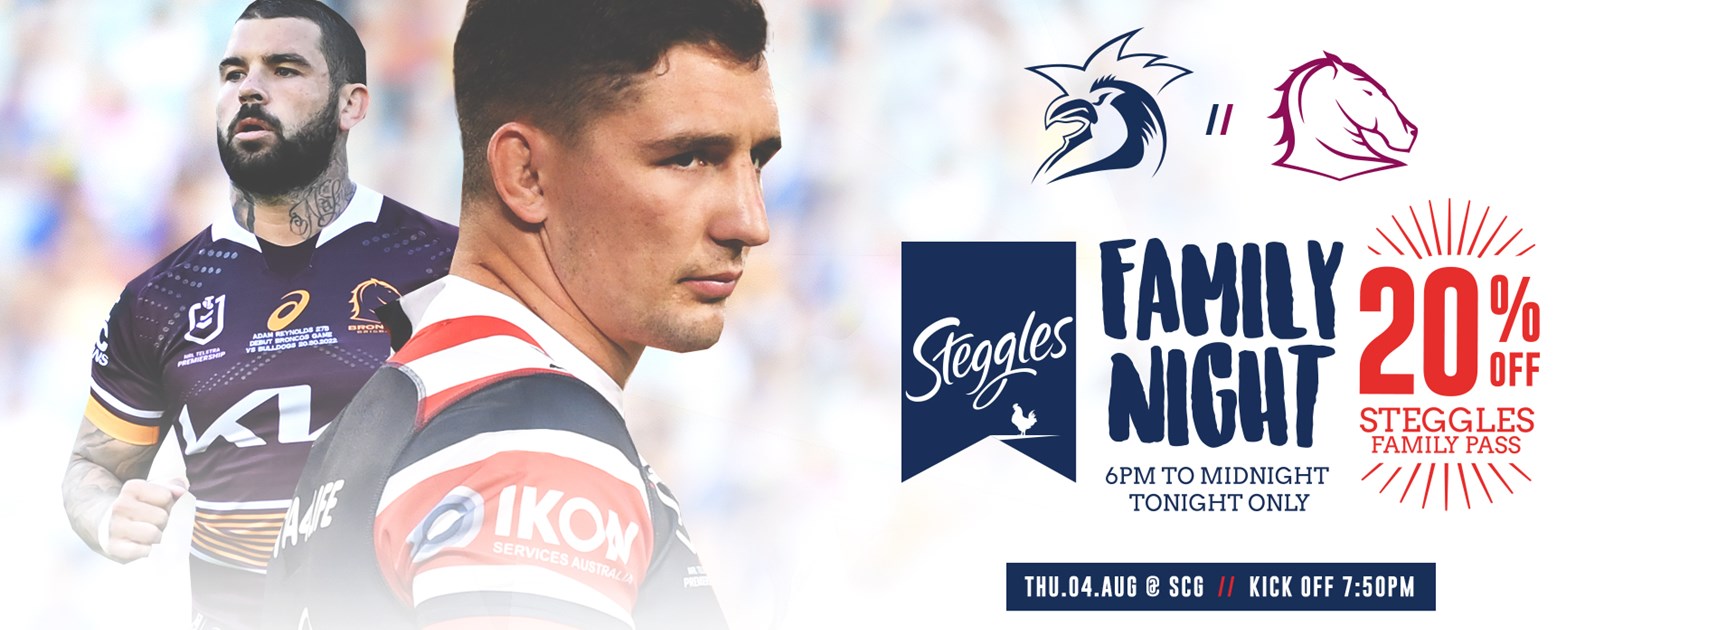 Get 20% Off All Round 21 Family Passes with Steggles Family Night!